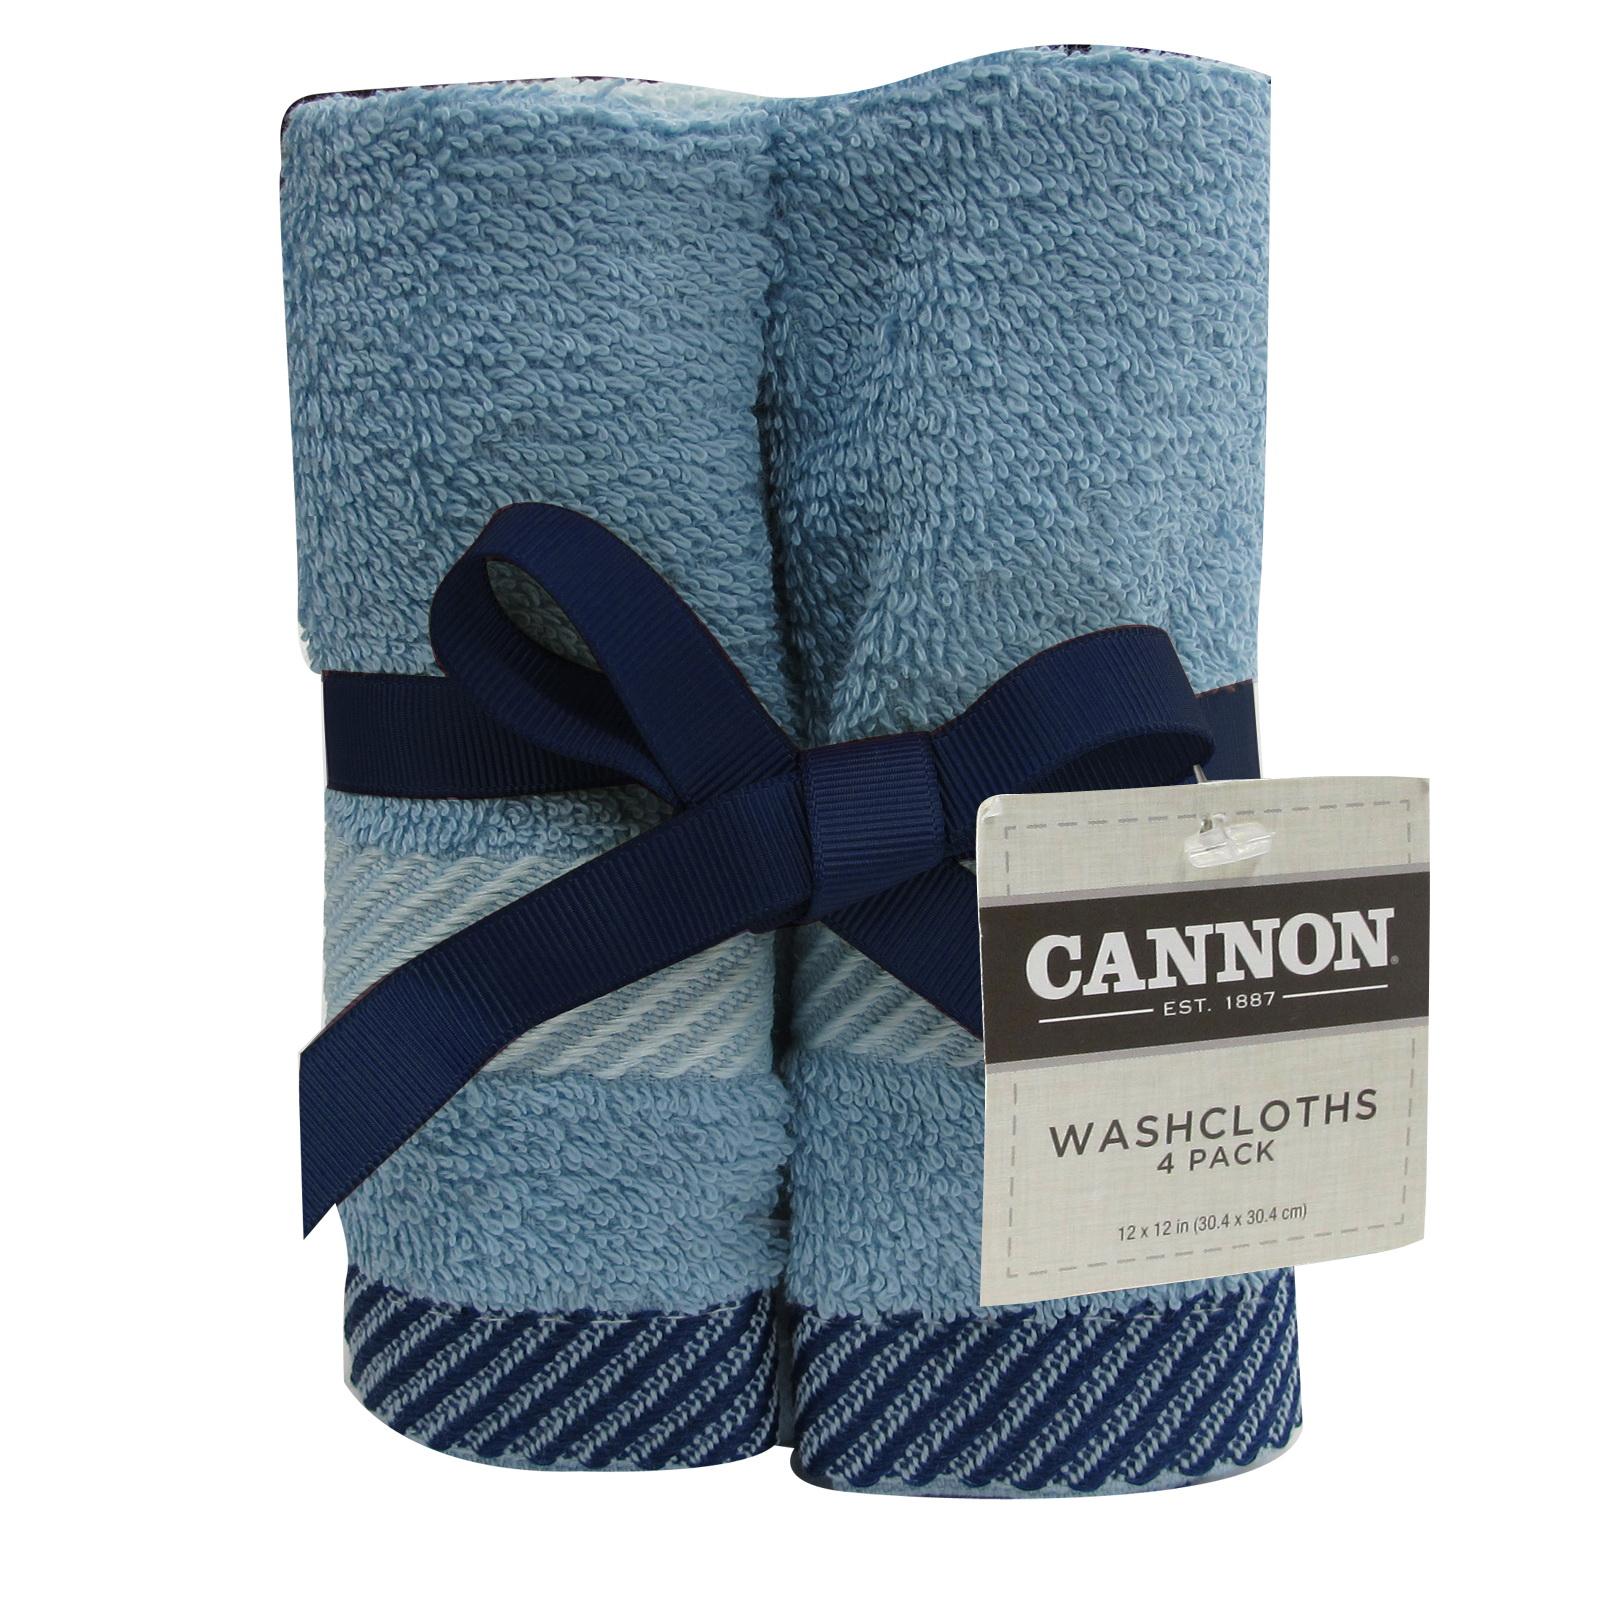 Cannon 4-Pack Washcloths - Bold Stripe Ombre